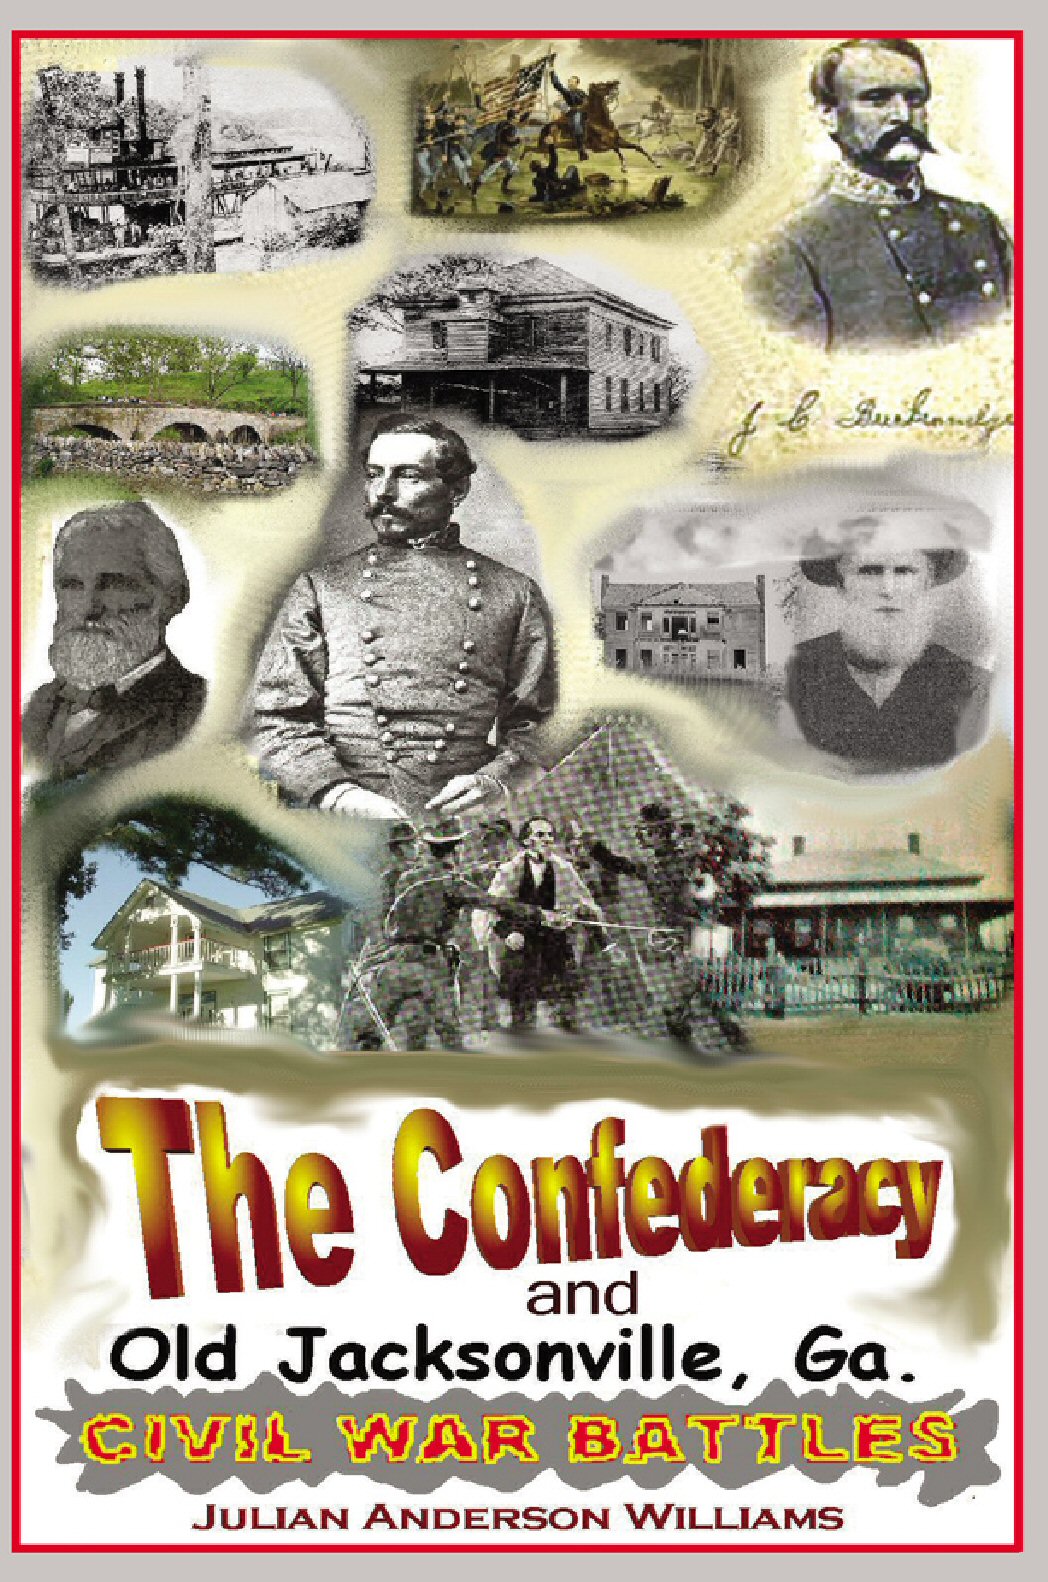 AVID READERS PUBLISHING GROUPS 2012 BOOK OF THE MONTH!  The Confederacy and Old Jacksonville, Ga. 